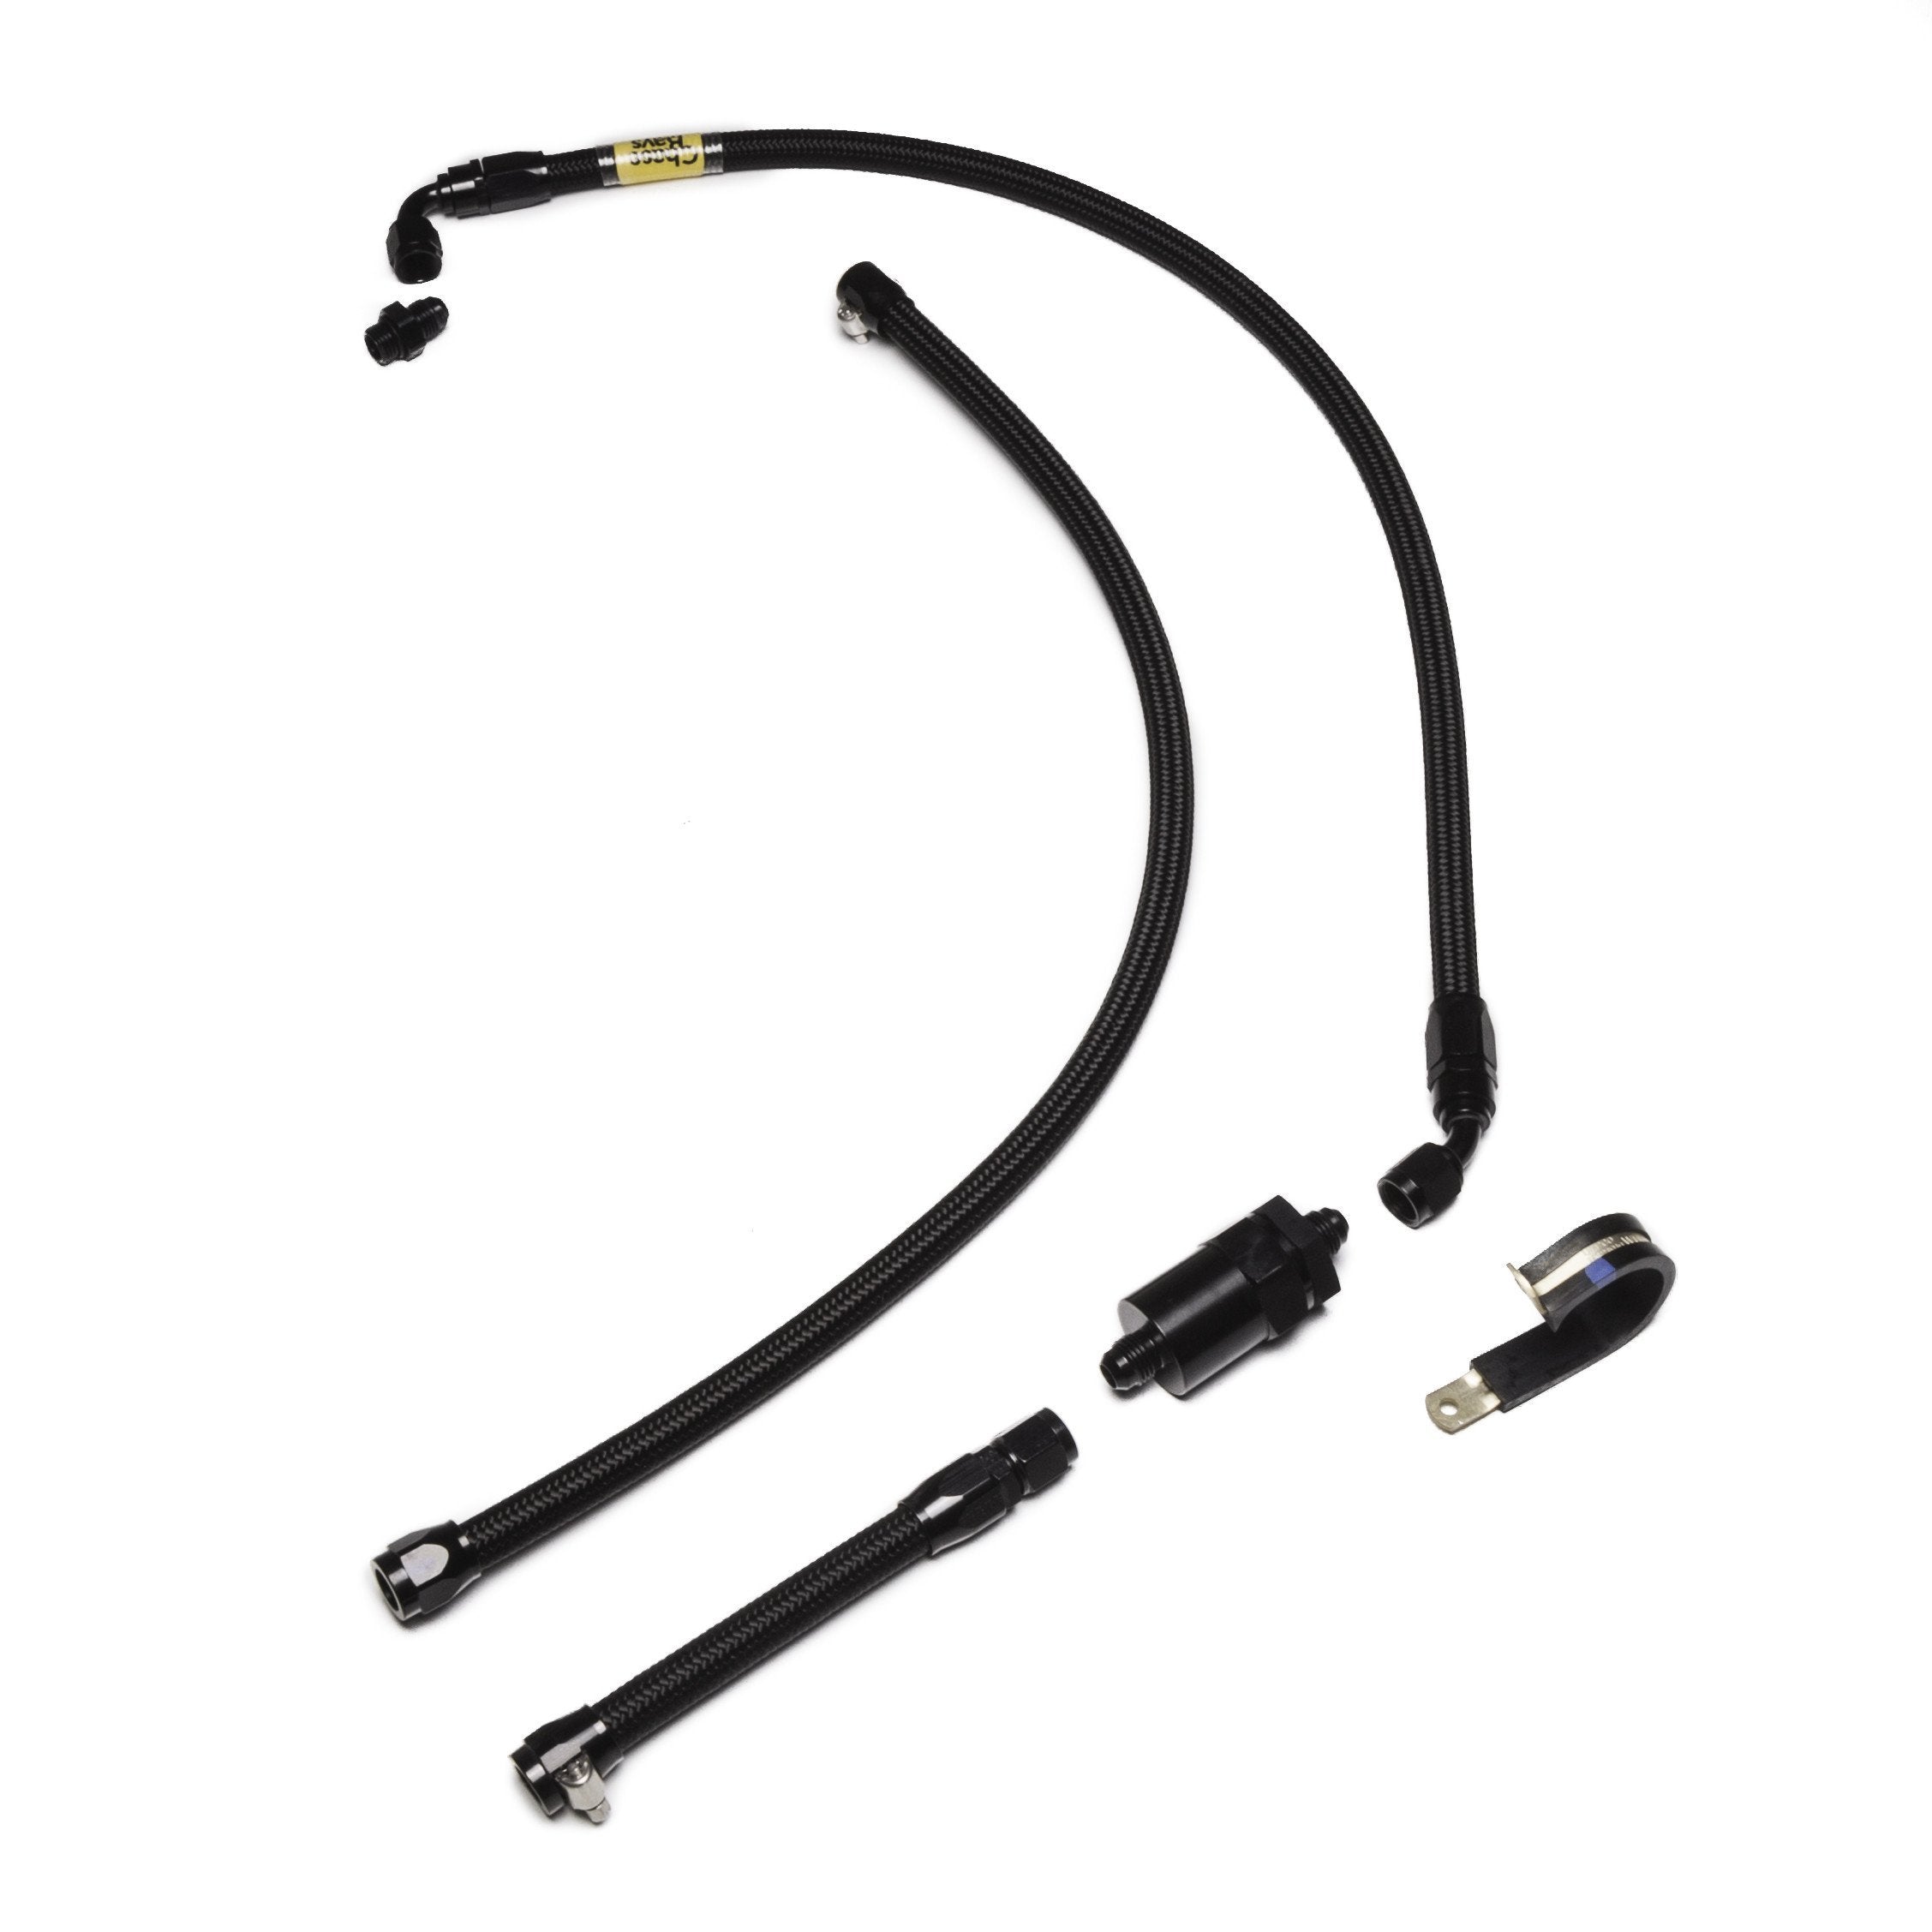 CHASE BAYS Nissan Silvia S13 S14 S15 Fuel Line Kit with Nissan RB20DET RB25DET RB26DETT Swap - PARTS33 GmbH